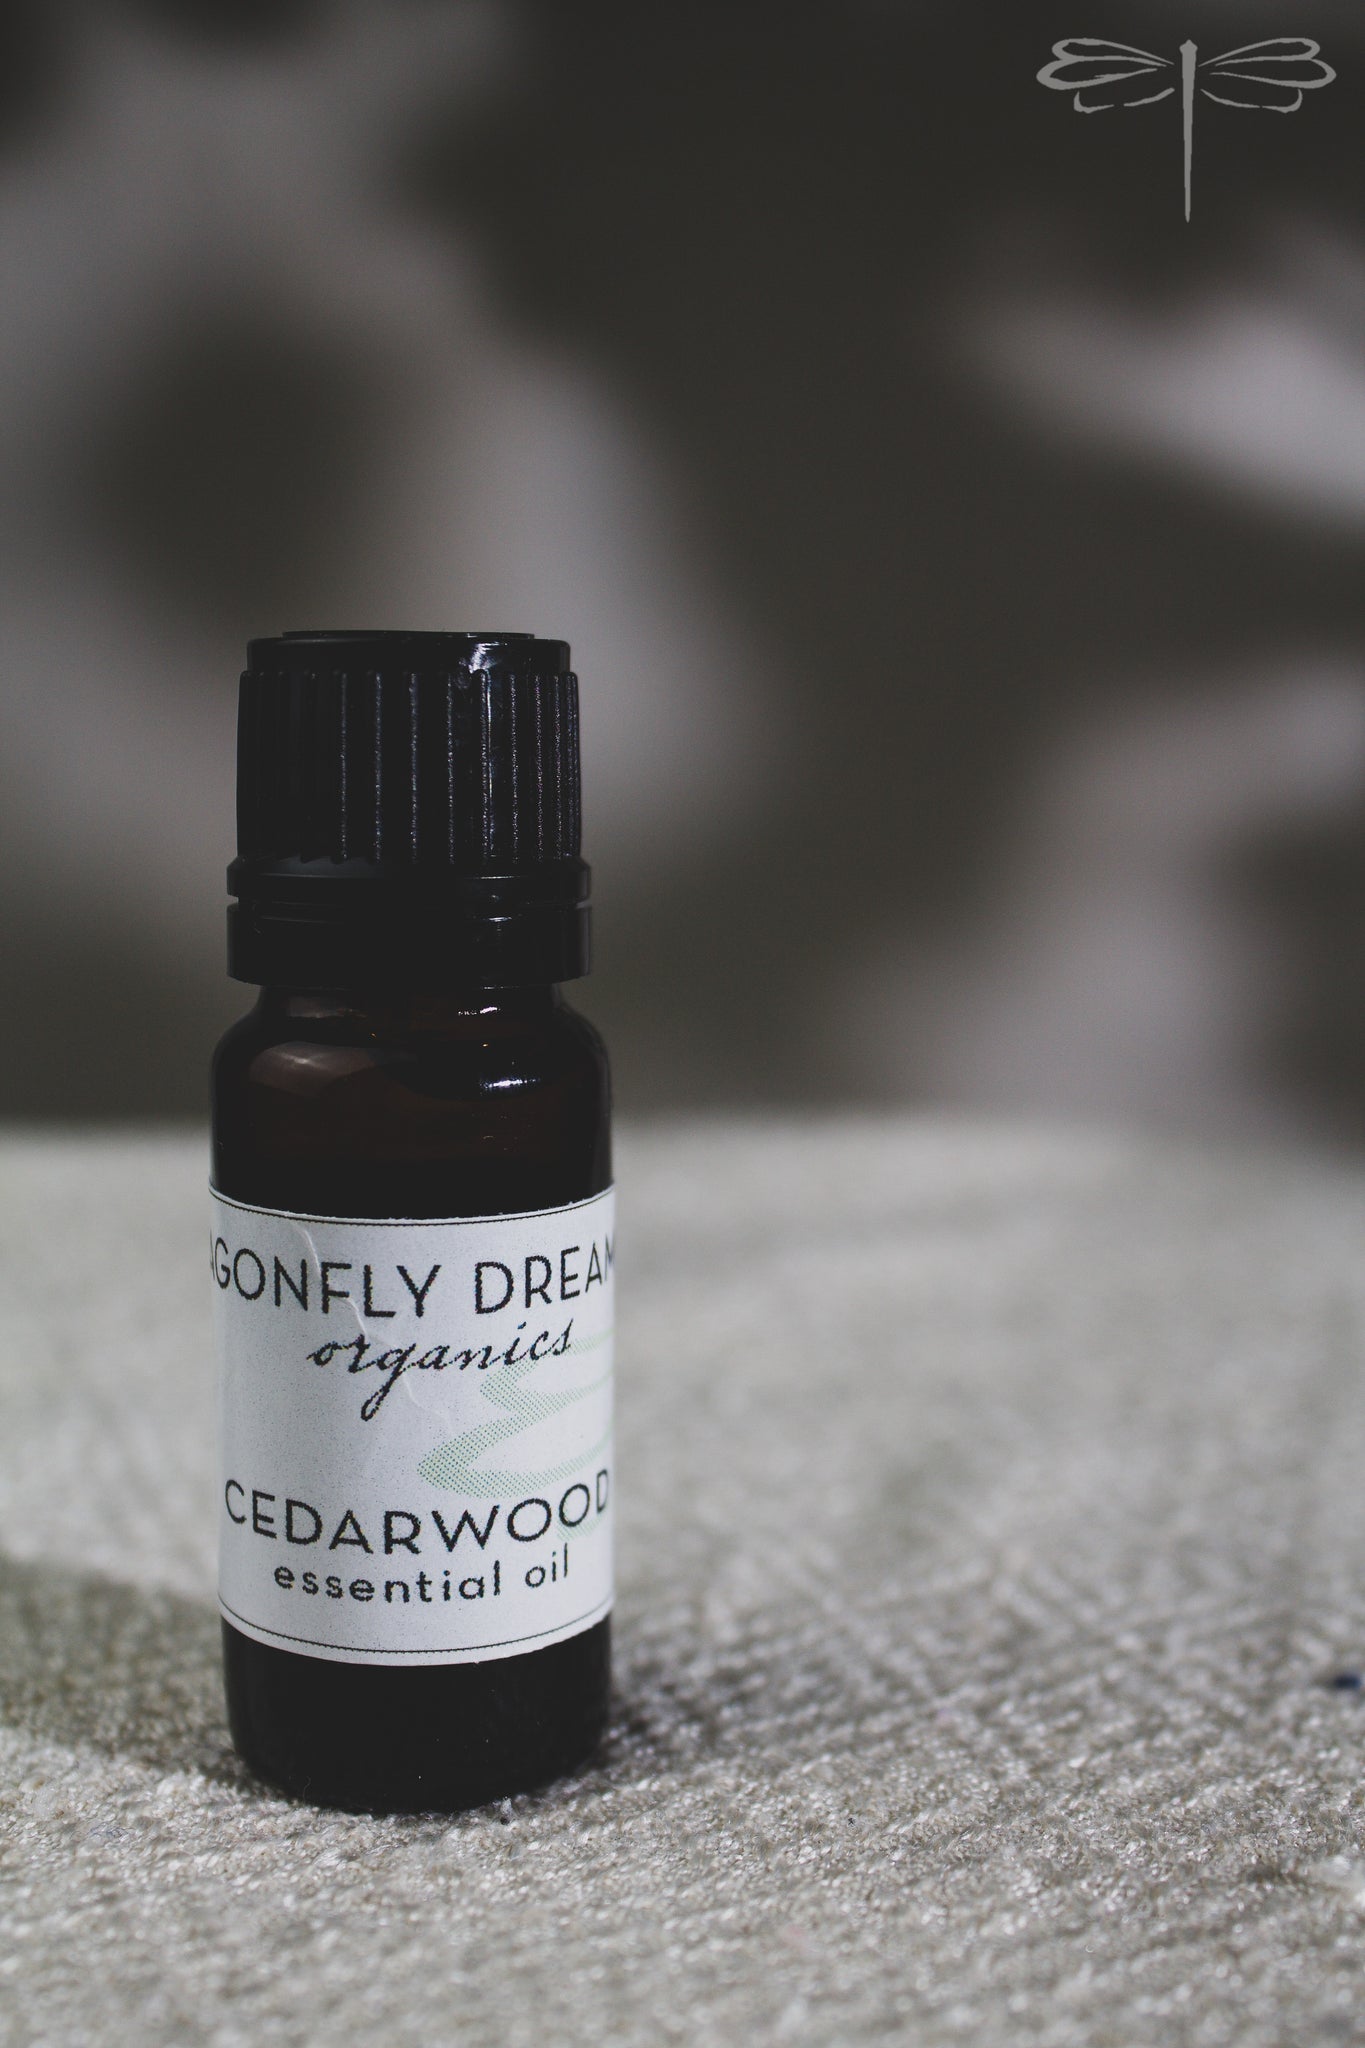 Pictured here, Cedarwood Maroc Essential Oil by Dragonfly Dreaming Organics